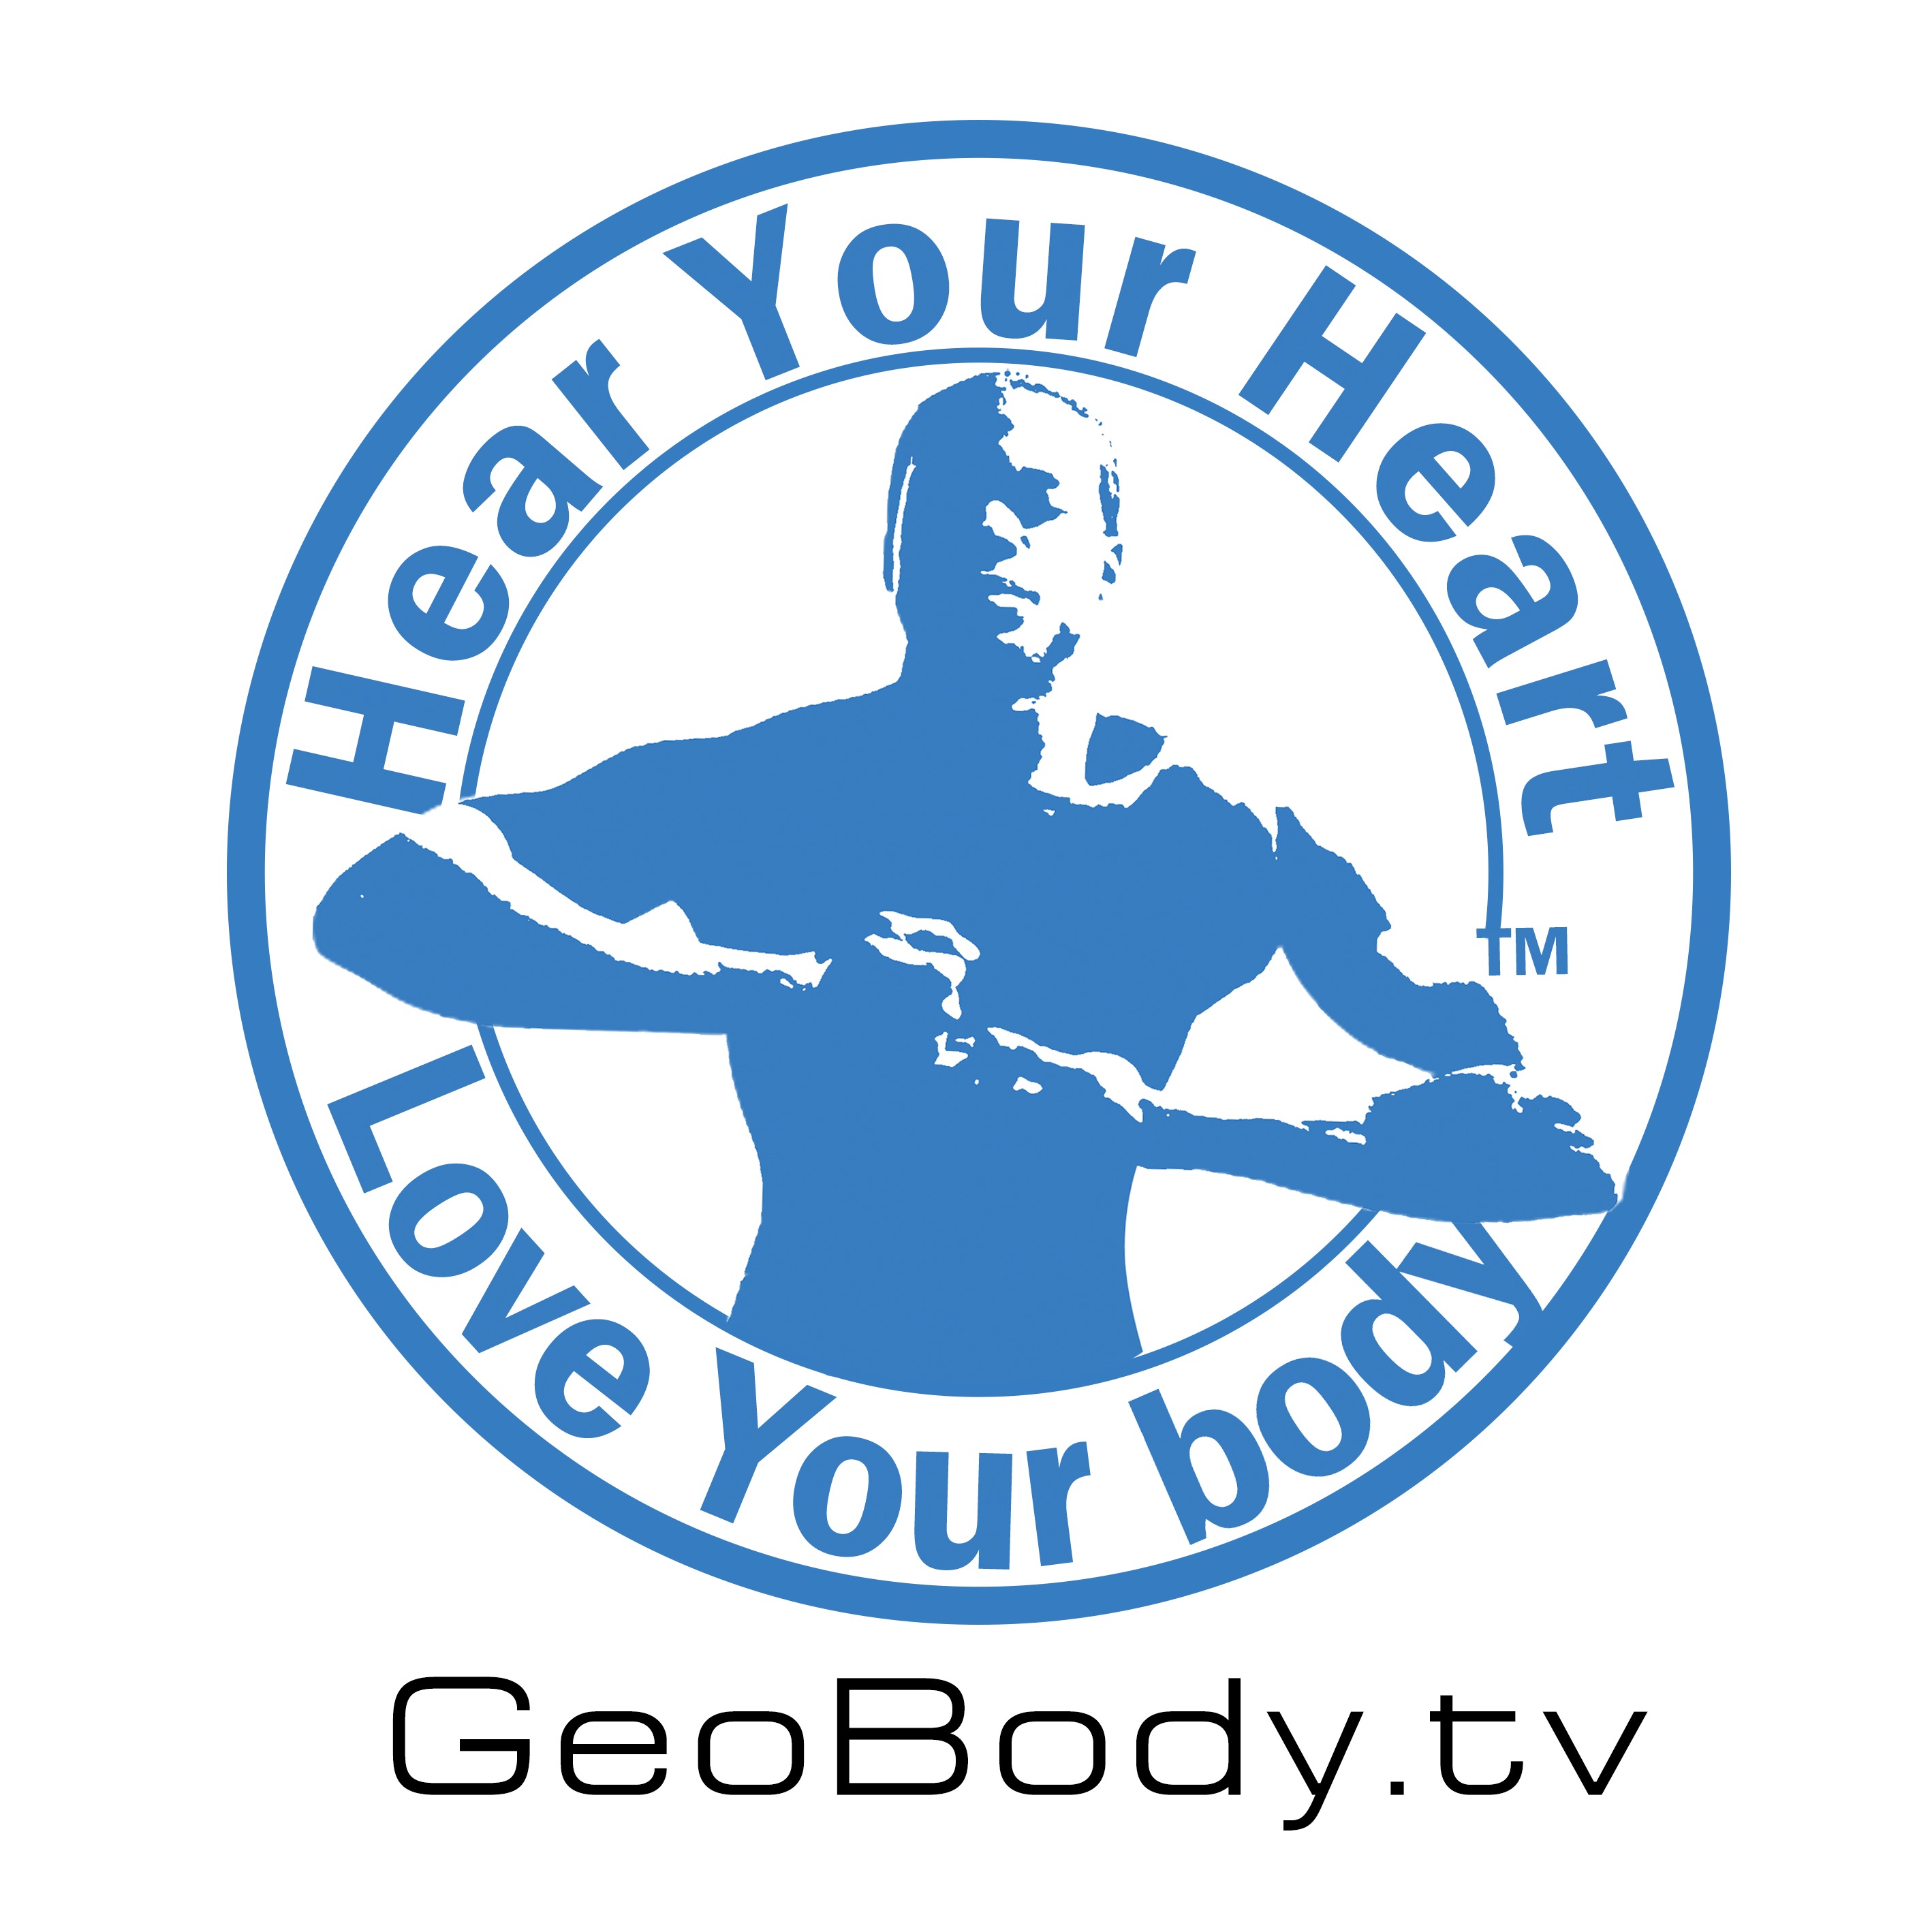  
Geobody.tv A Time Sense philosophy created to improve our human image 
